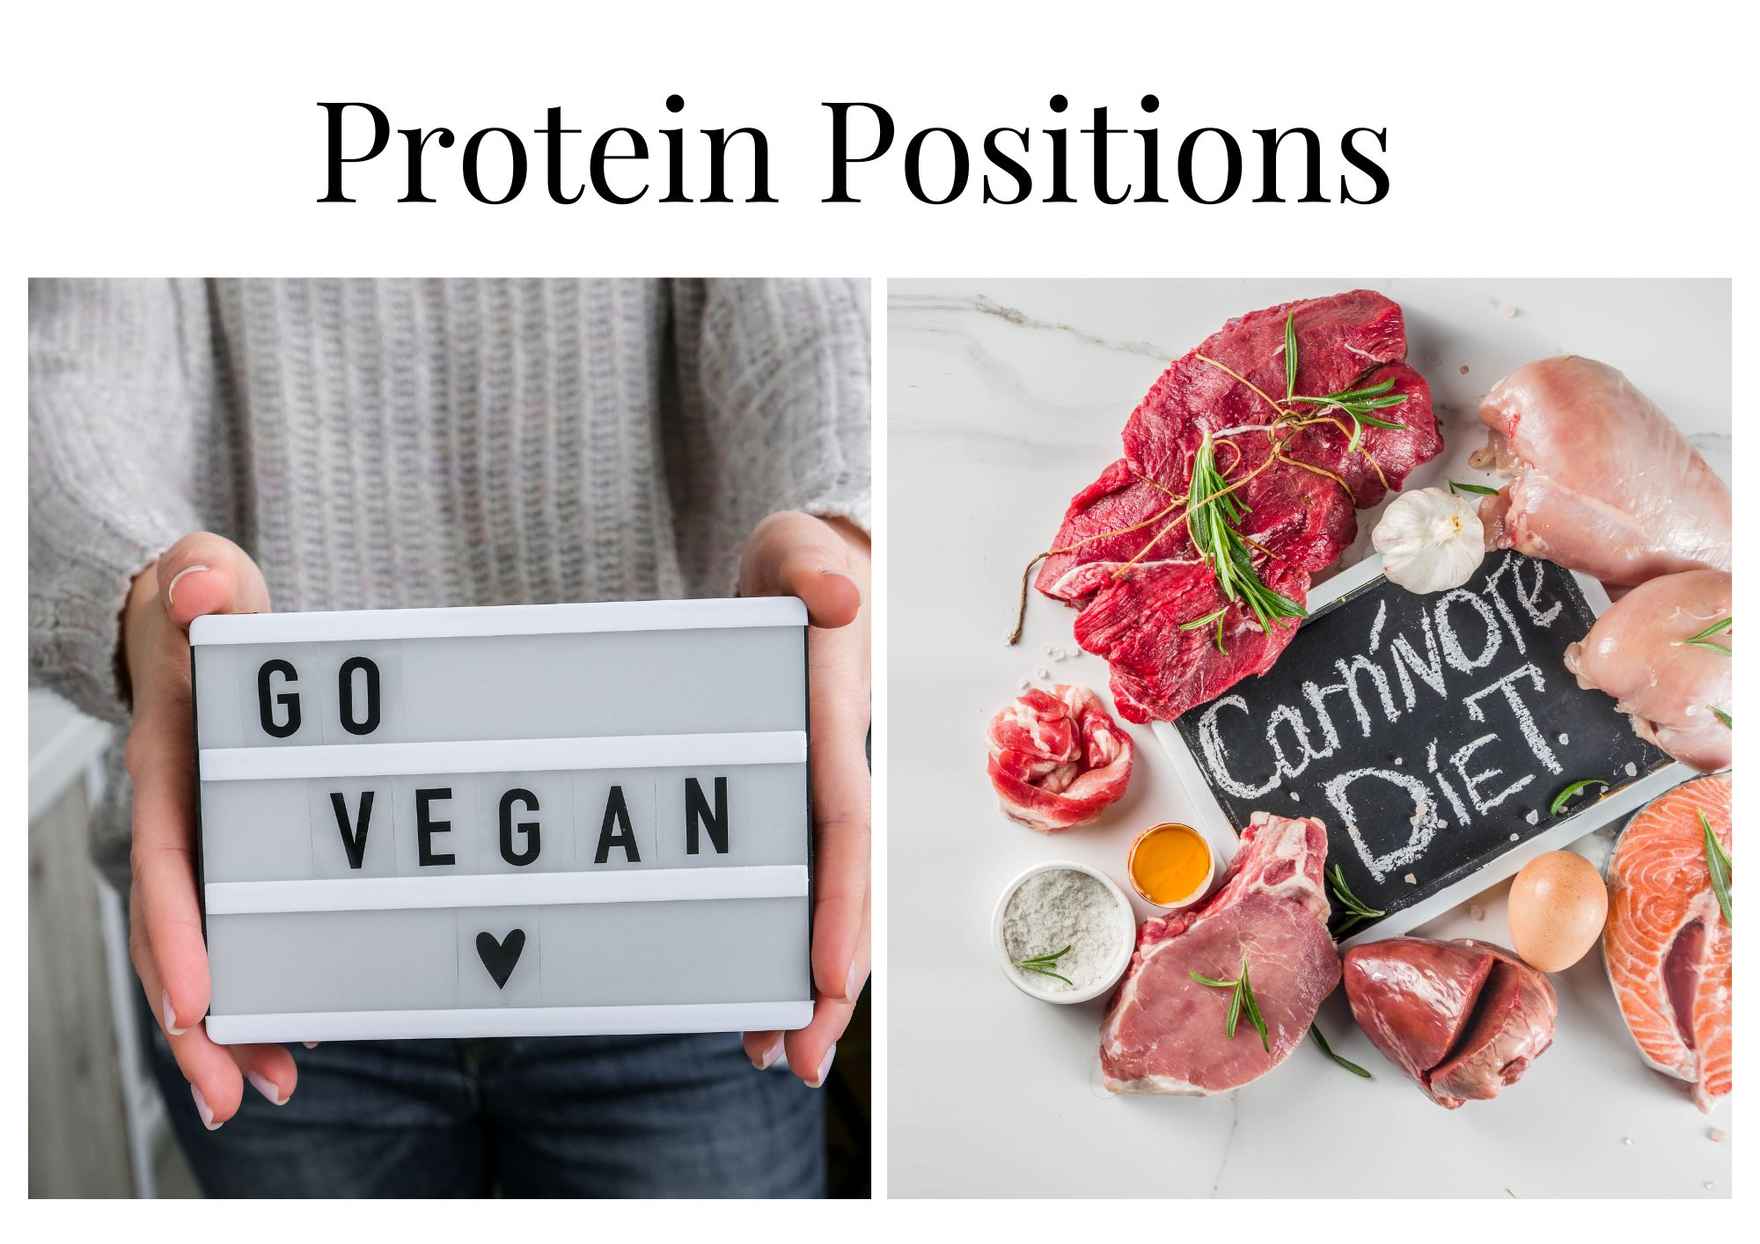 Protein Positions